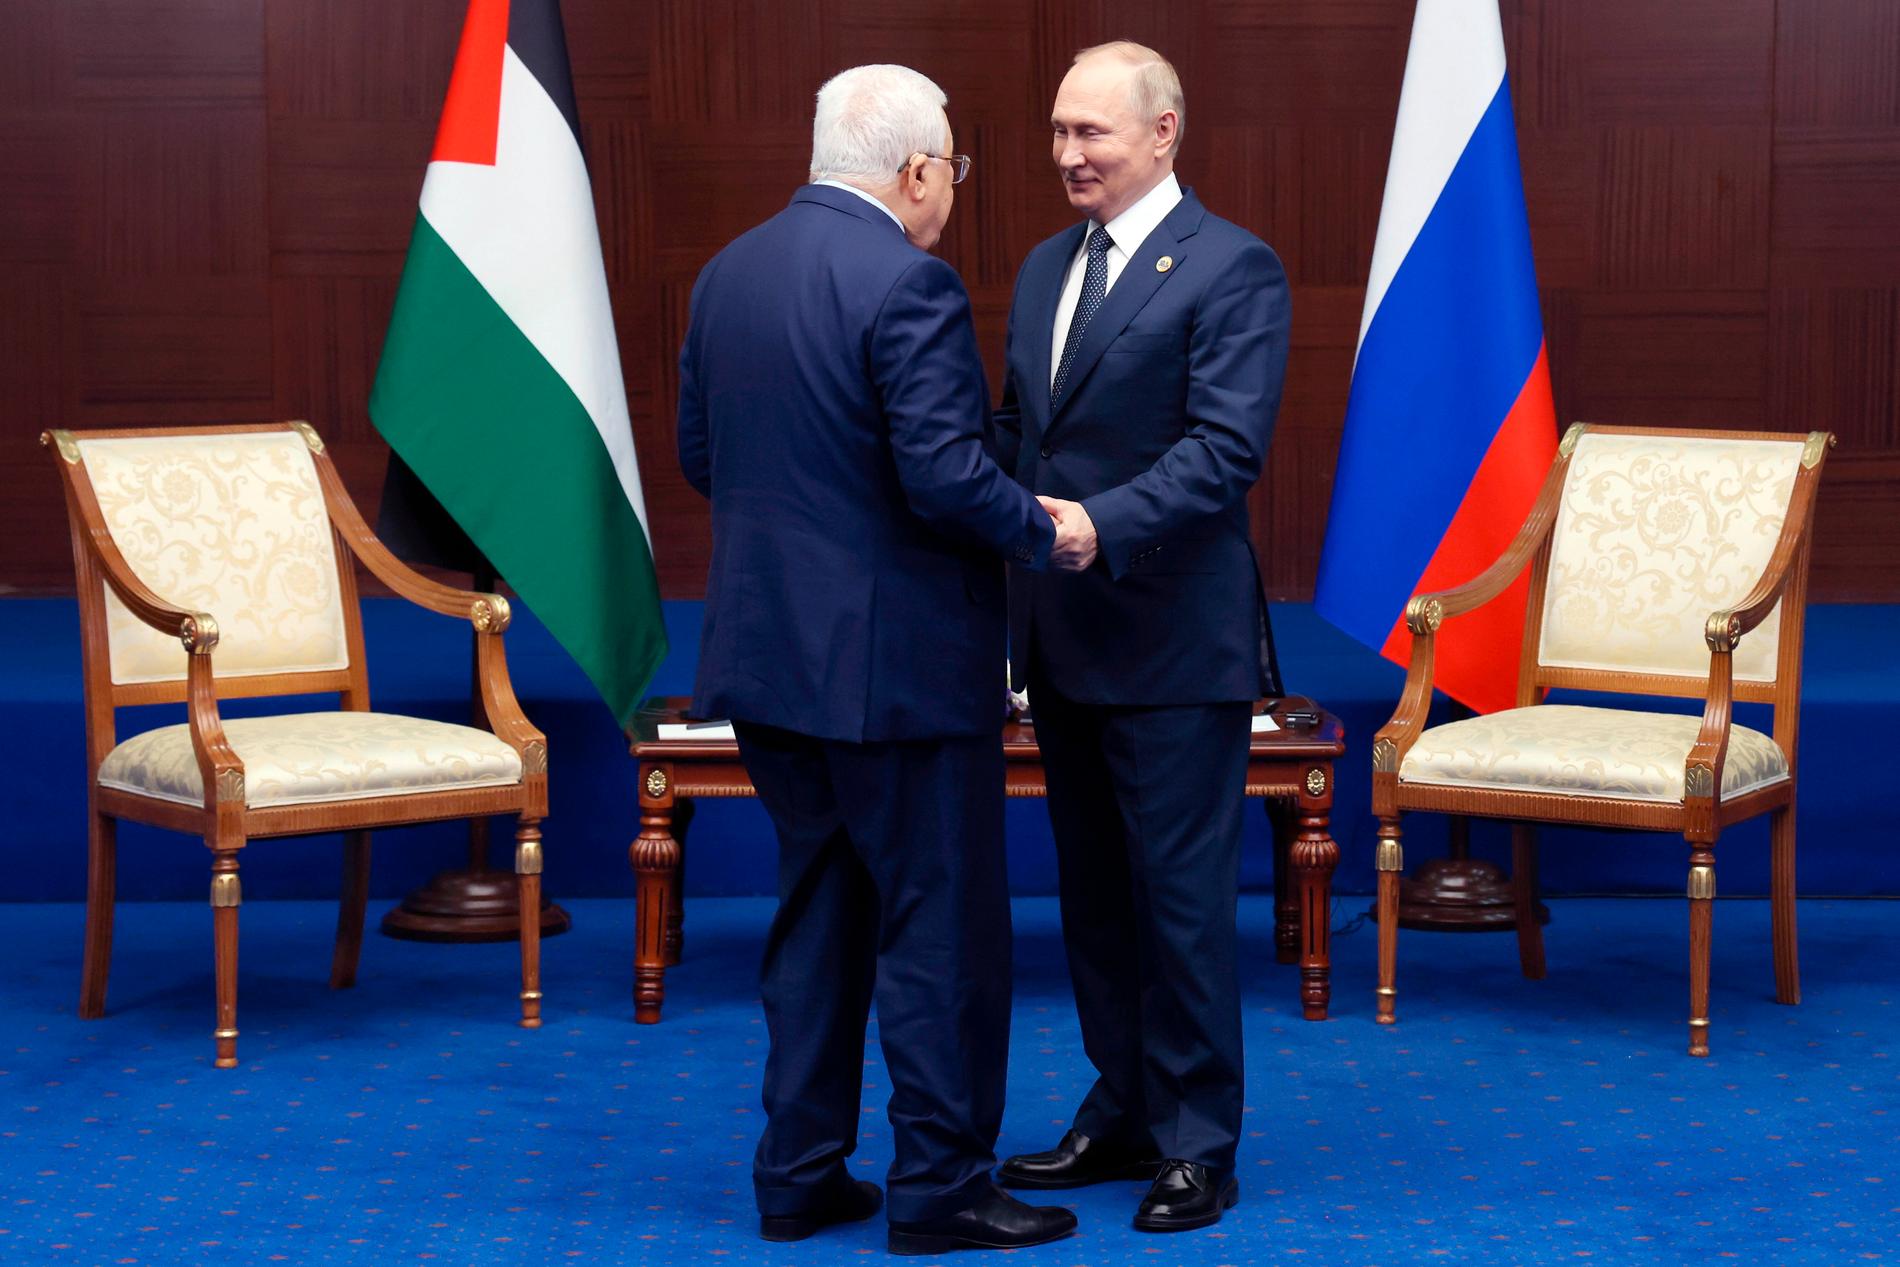 Smil: Here, this photo shows the presidents of Palestine and Russia during a meeting in Kazakhstan in October 2022. The photo was published by Russian state-run media.